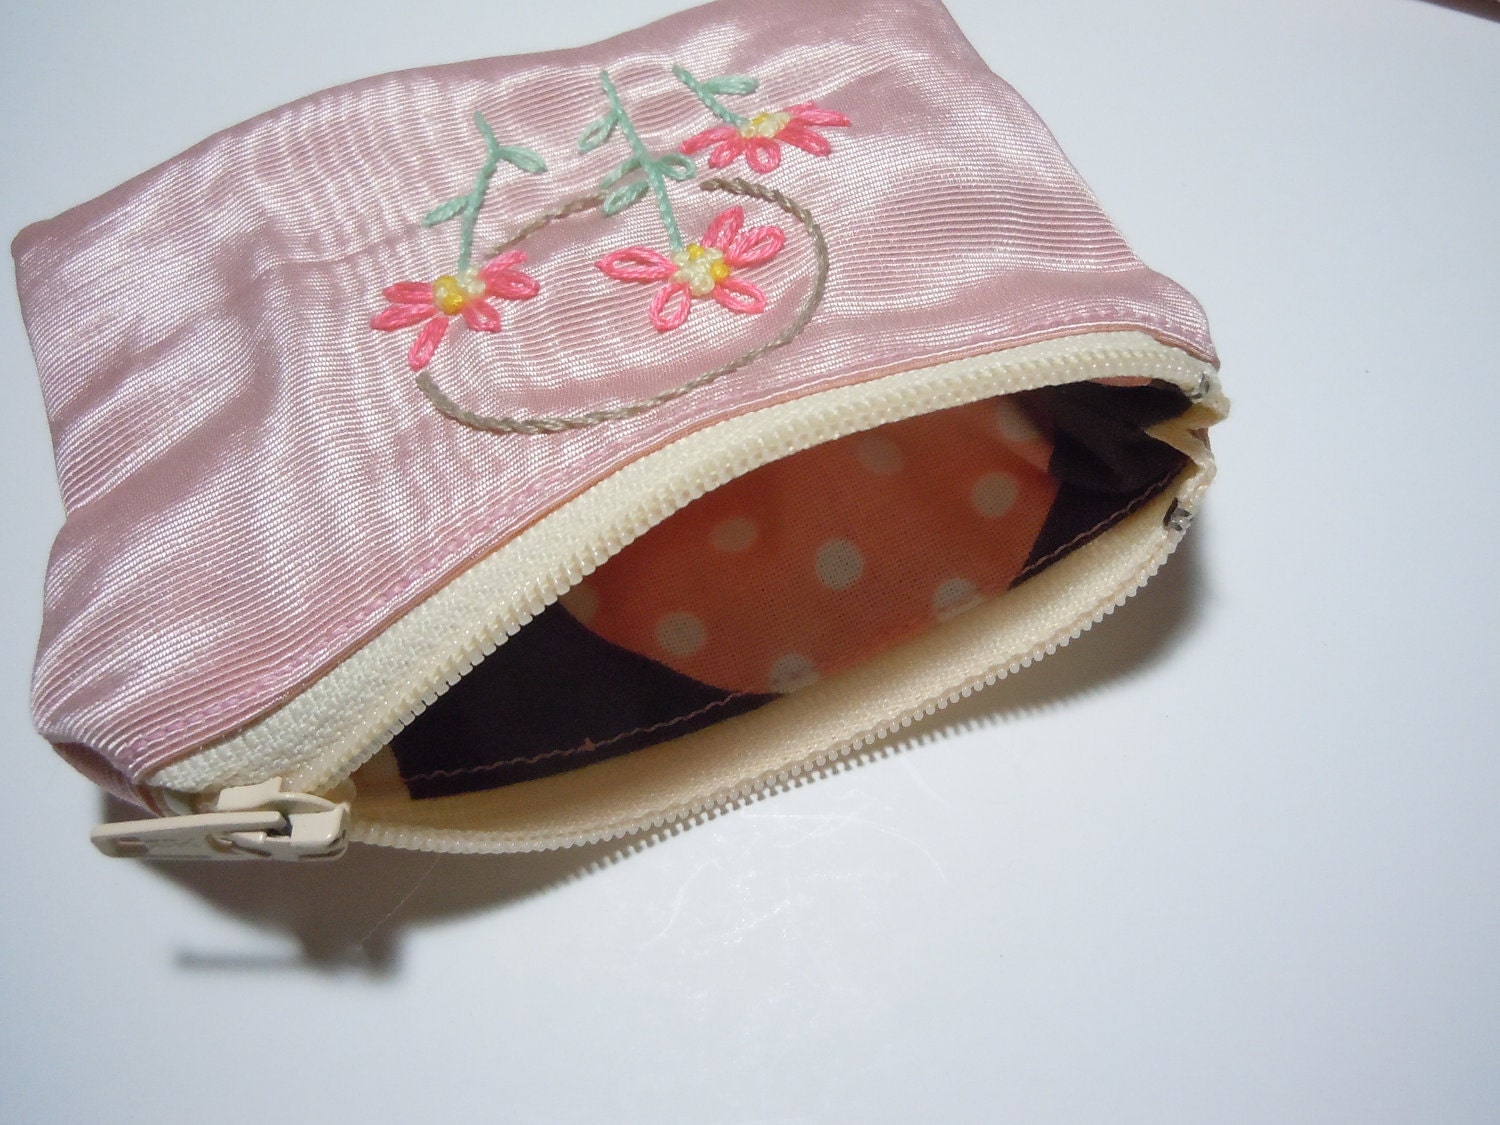 Embroidered Coin Purse - Pale Peach Moire fabric